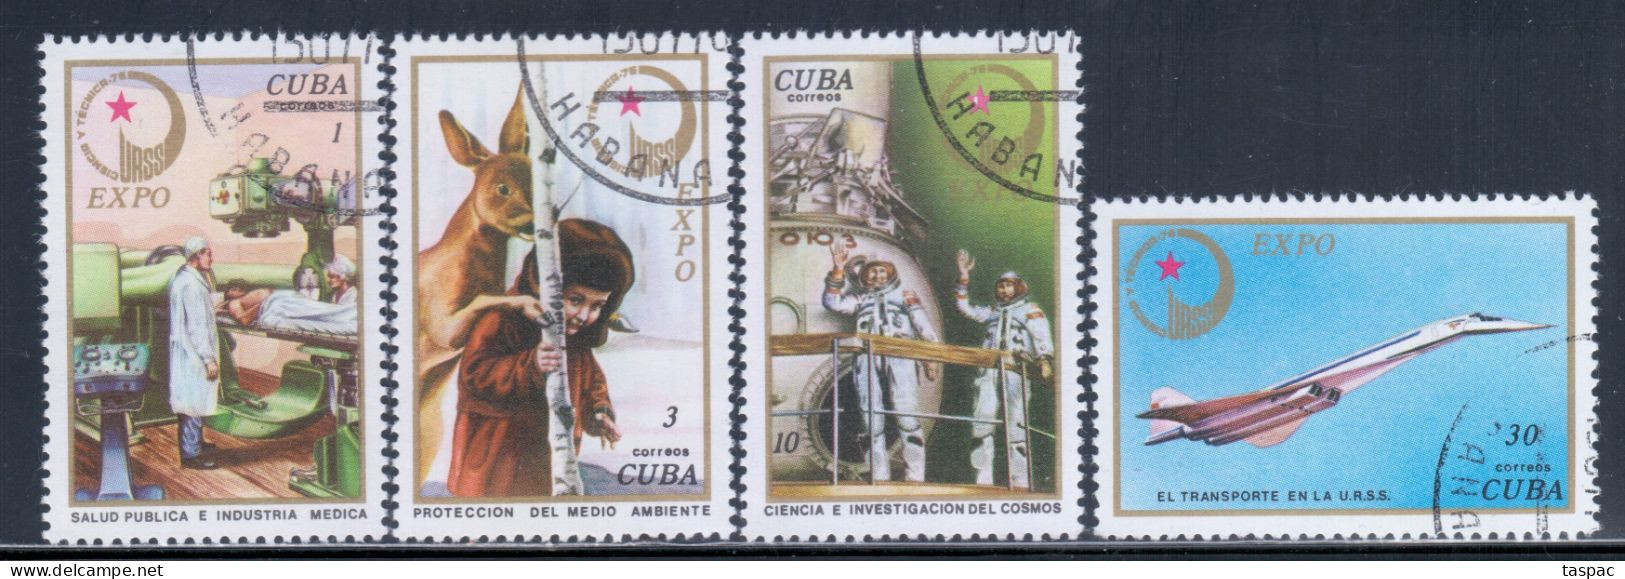 Cuba 1976 Mi# 2150-2153 Used - EXPO '76, USSR / Health, Fauna, Space, Supersonic Jet - Used Stamps